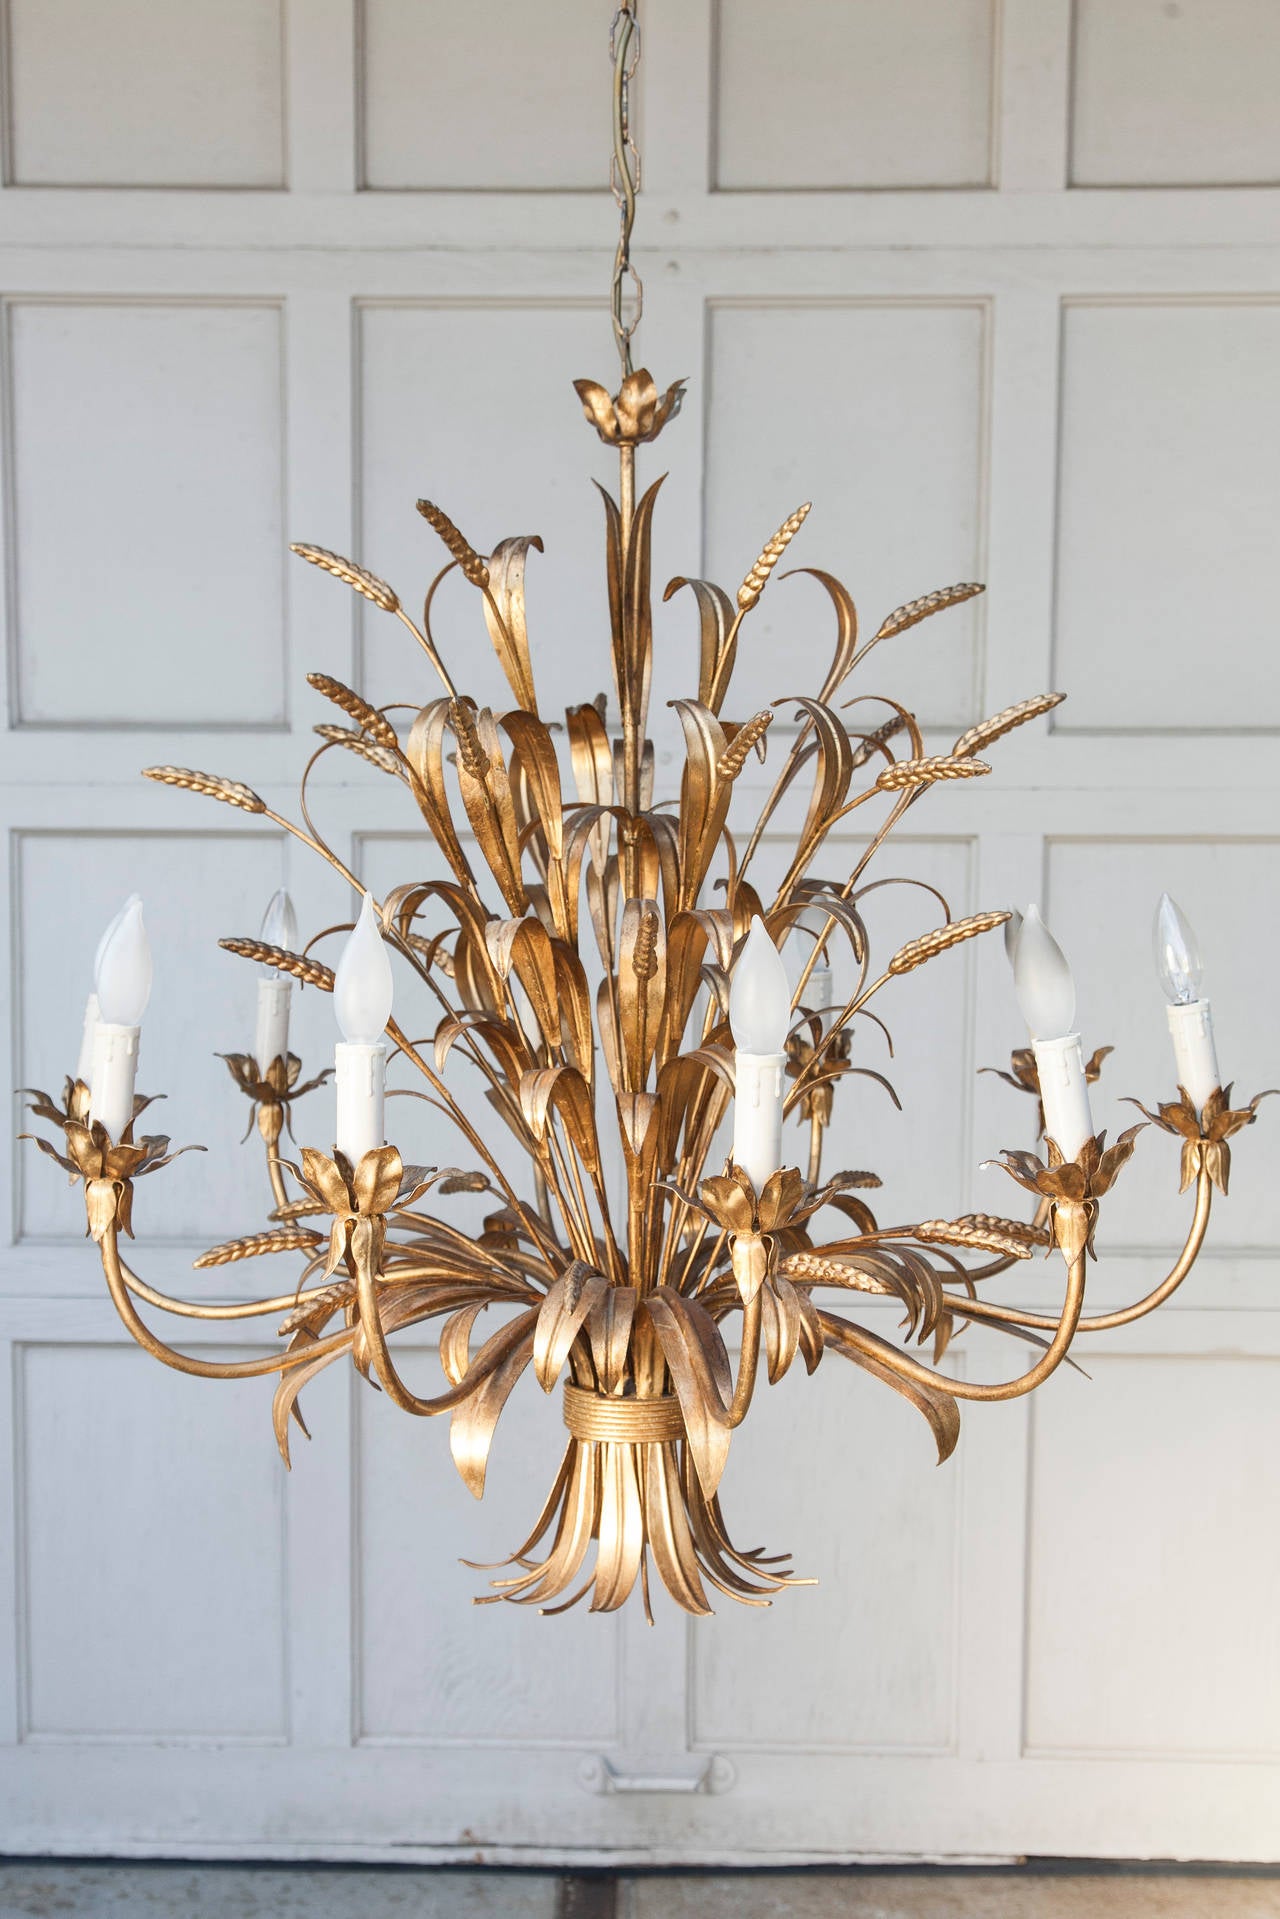 This Classic sheath of wheat design chandelier features a spray of bound wheat and leaves with floral petals extending in ten arms to hold candelabra lights. This warm and grand chandelier will enhance both old world and modern environments.